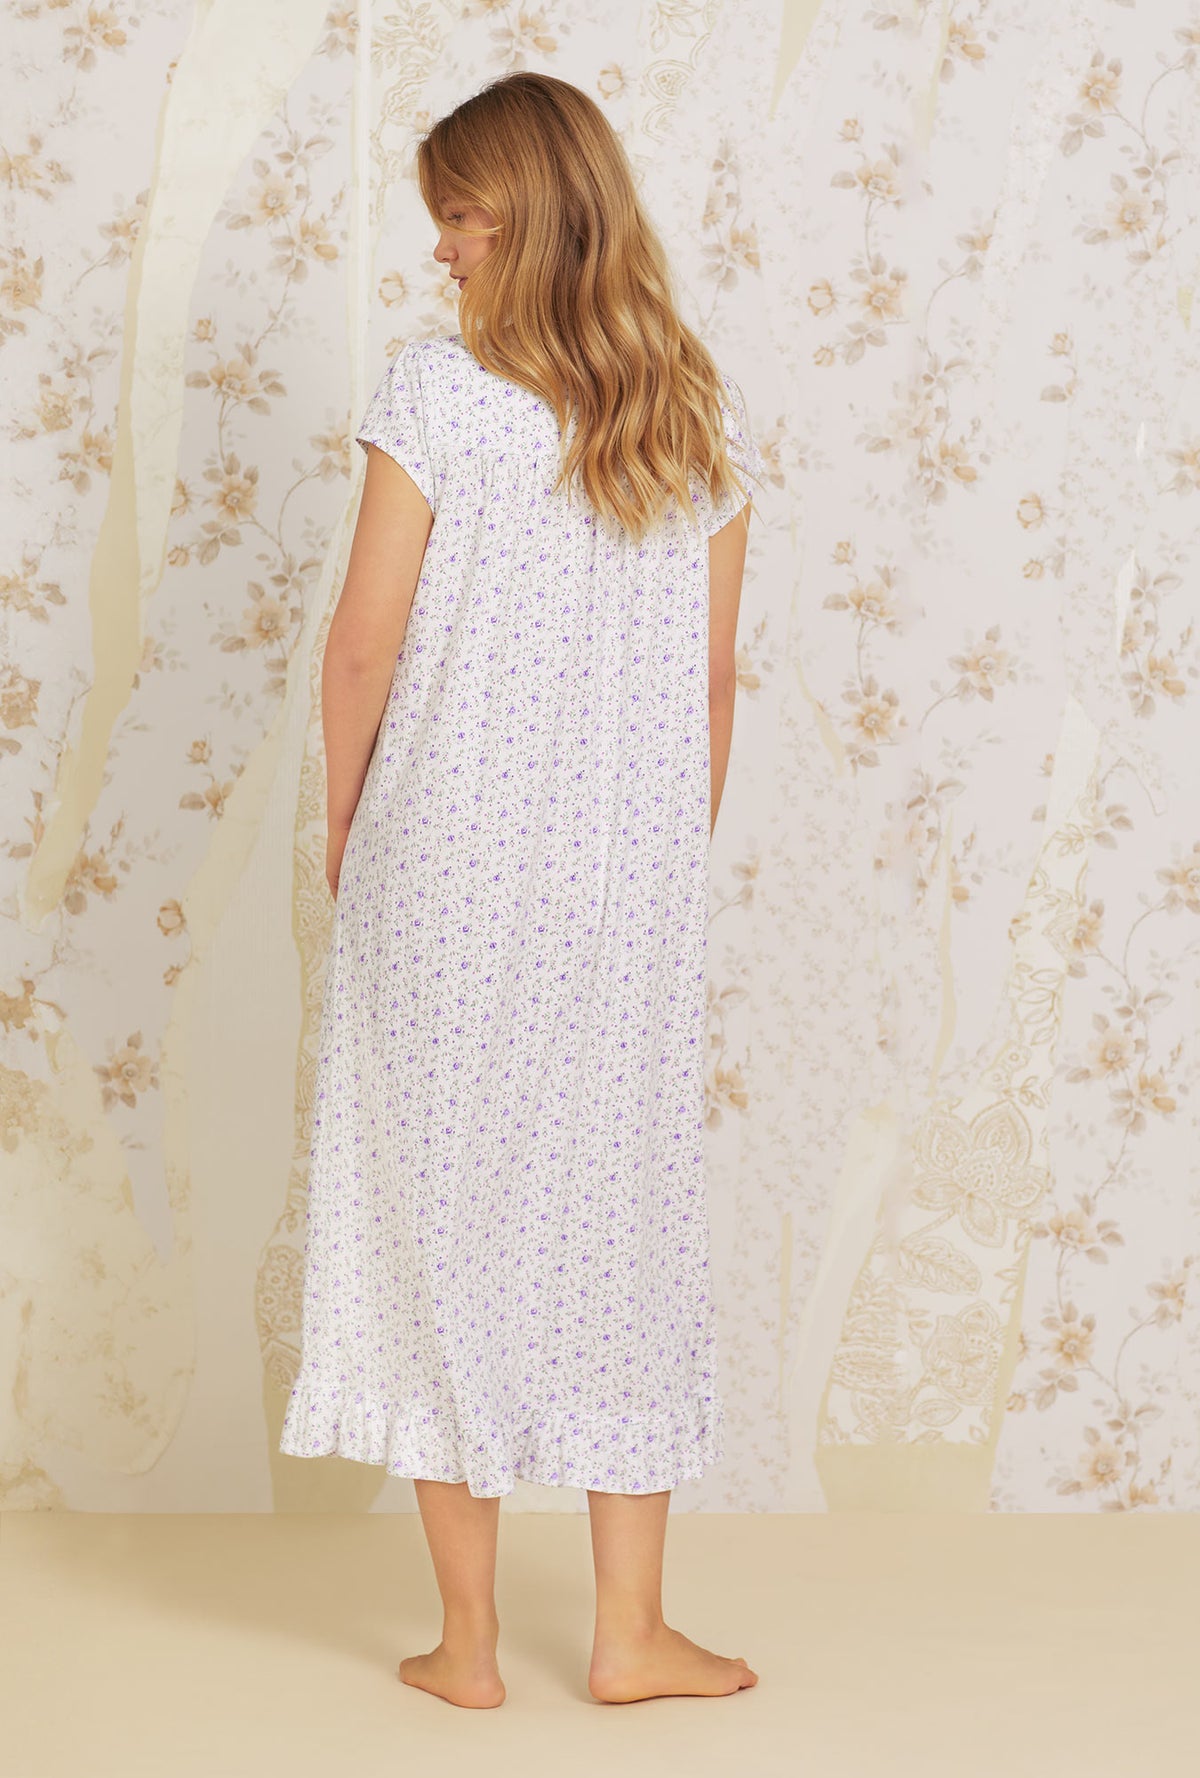 A lady wearing white Cotton Knit Nightgown with Lavender Garden  print